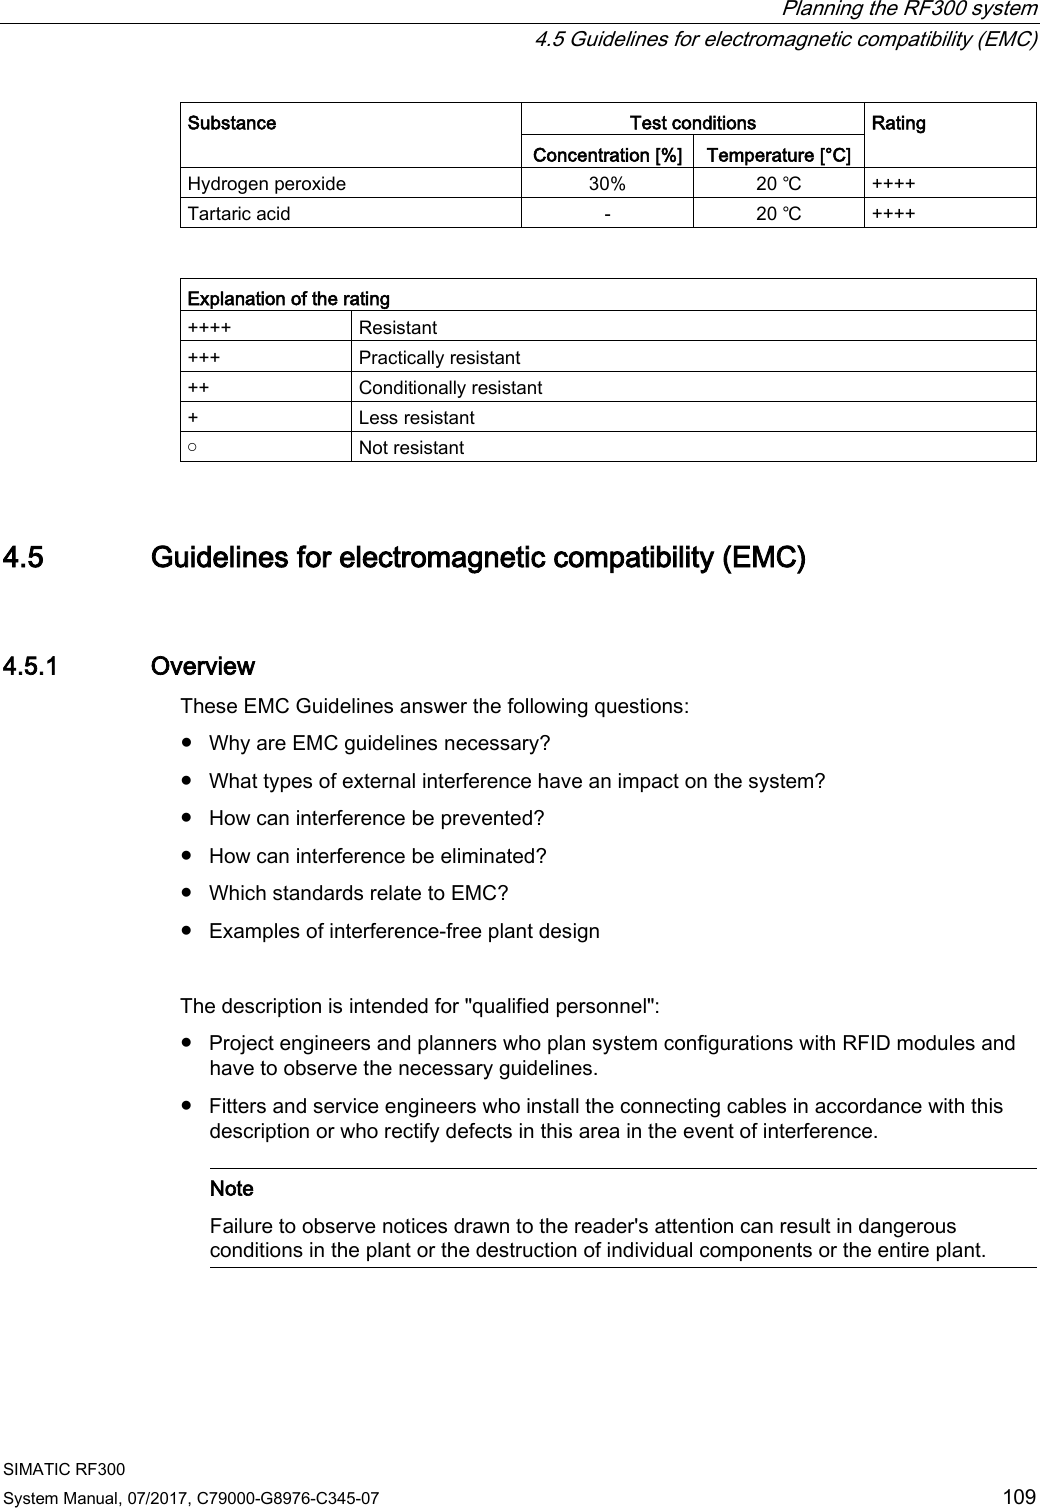  Planning the RF300 system  4.5 Guidelines for electromagnetic compatibility (EMC) SIMATIC RF300 System Manual, 07/2017, C79000-G8976-C345-07 109 Substance Test conditions Rating Concentration [%] Temperature [°C] Hydrogen peroxide 30% 20 ℃ ++++ Tartaric acid - 20 ℃ ++++   Explanation of the rating ++++ Resistant +++ Practically resistant ++ Conditionally resistant + Less resistant ￮ Not resistant 4.5 Guidelines for electromagnetic compatibility (EMC) 4.5.1 Overview These EMC Guidelines answer the following questions:  ● Why are EMC guidelines necessary? ● What types of external interference have an impact on the system? ● How can interference be prevented? ● How can interference be eliminated? ● Which standards relate to EMC? ● Examples of interference-free plant design  The description is intended for &quot;qualified personnel&quot;: ● Project engineers and planners who plan system configurations with RFID modules and have to observe the necessary guidelines. ● Fitters and service engineers who install the connecting cables in accordance with this description or who rectify defects in this area in the event of interference.    Note Failure to observe notices drawn to the reader&apos;s attention can result in dangerous conditions in the plant or the destruction of individual components or the entire plant.  